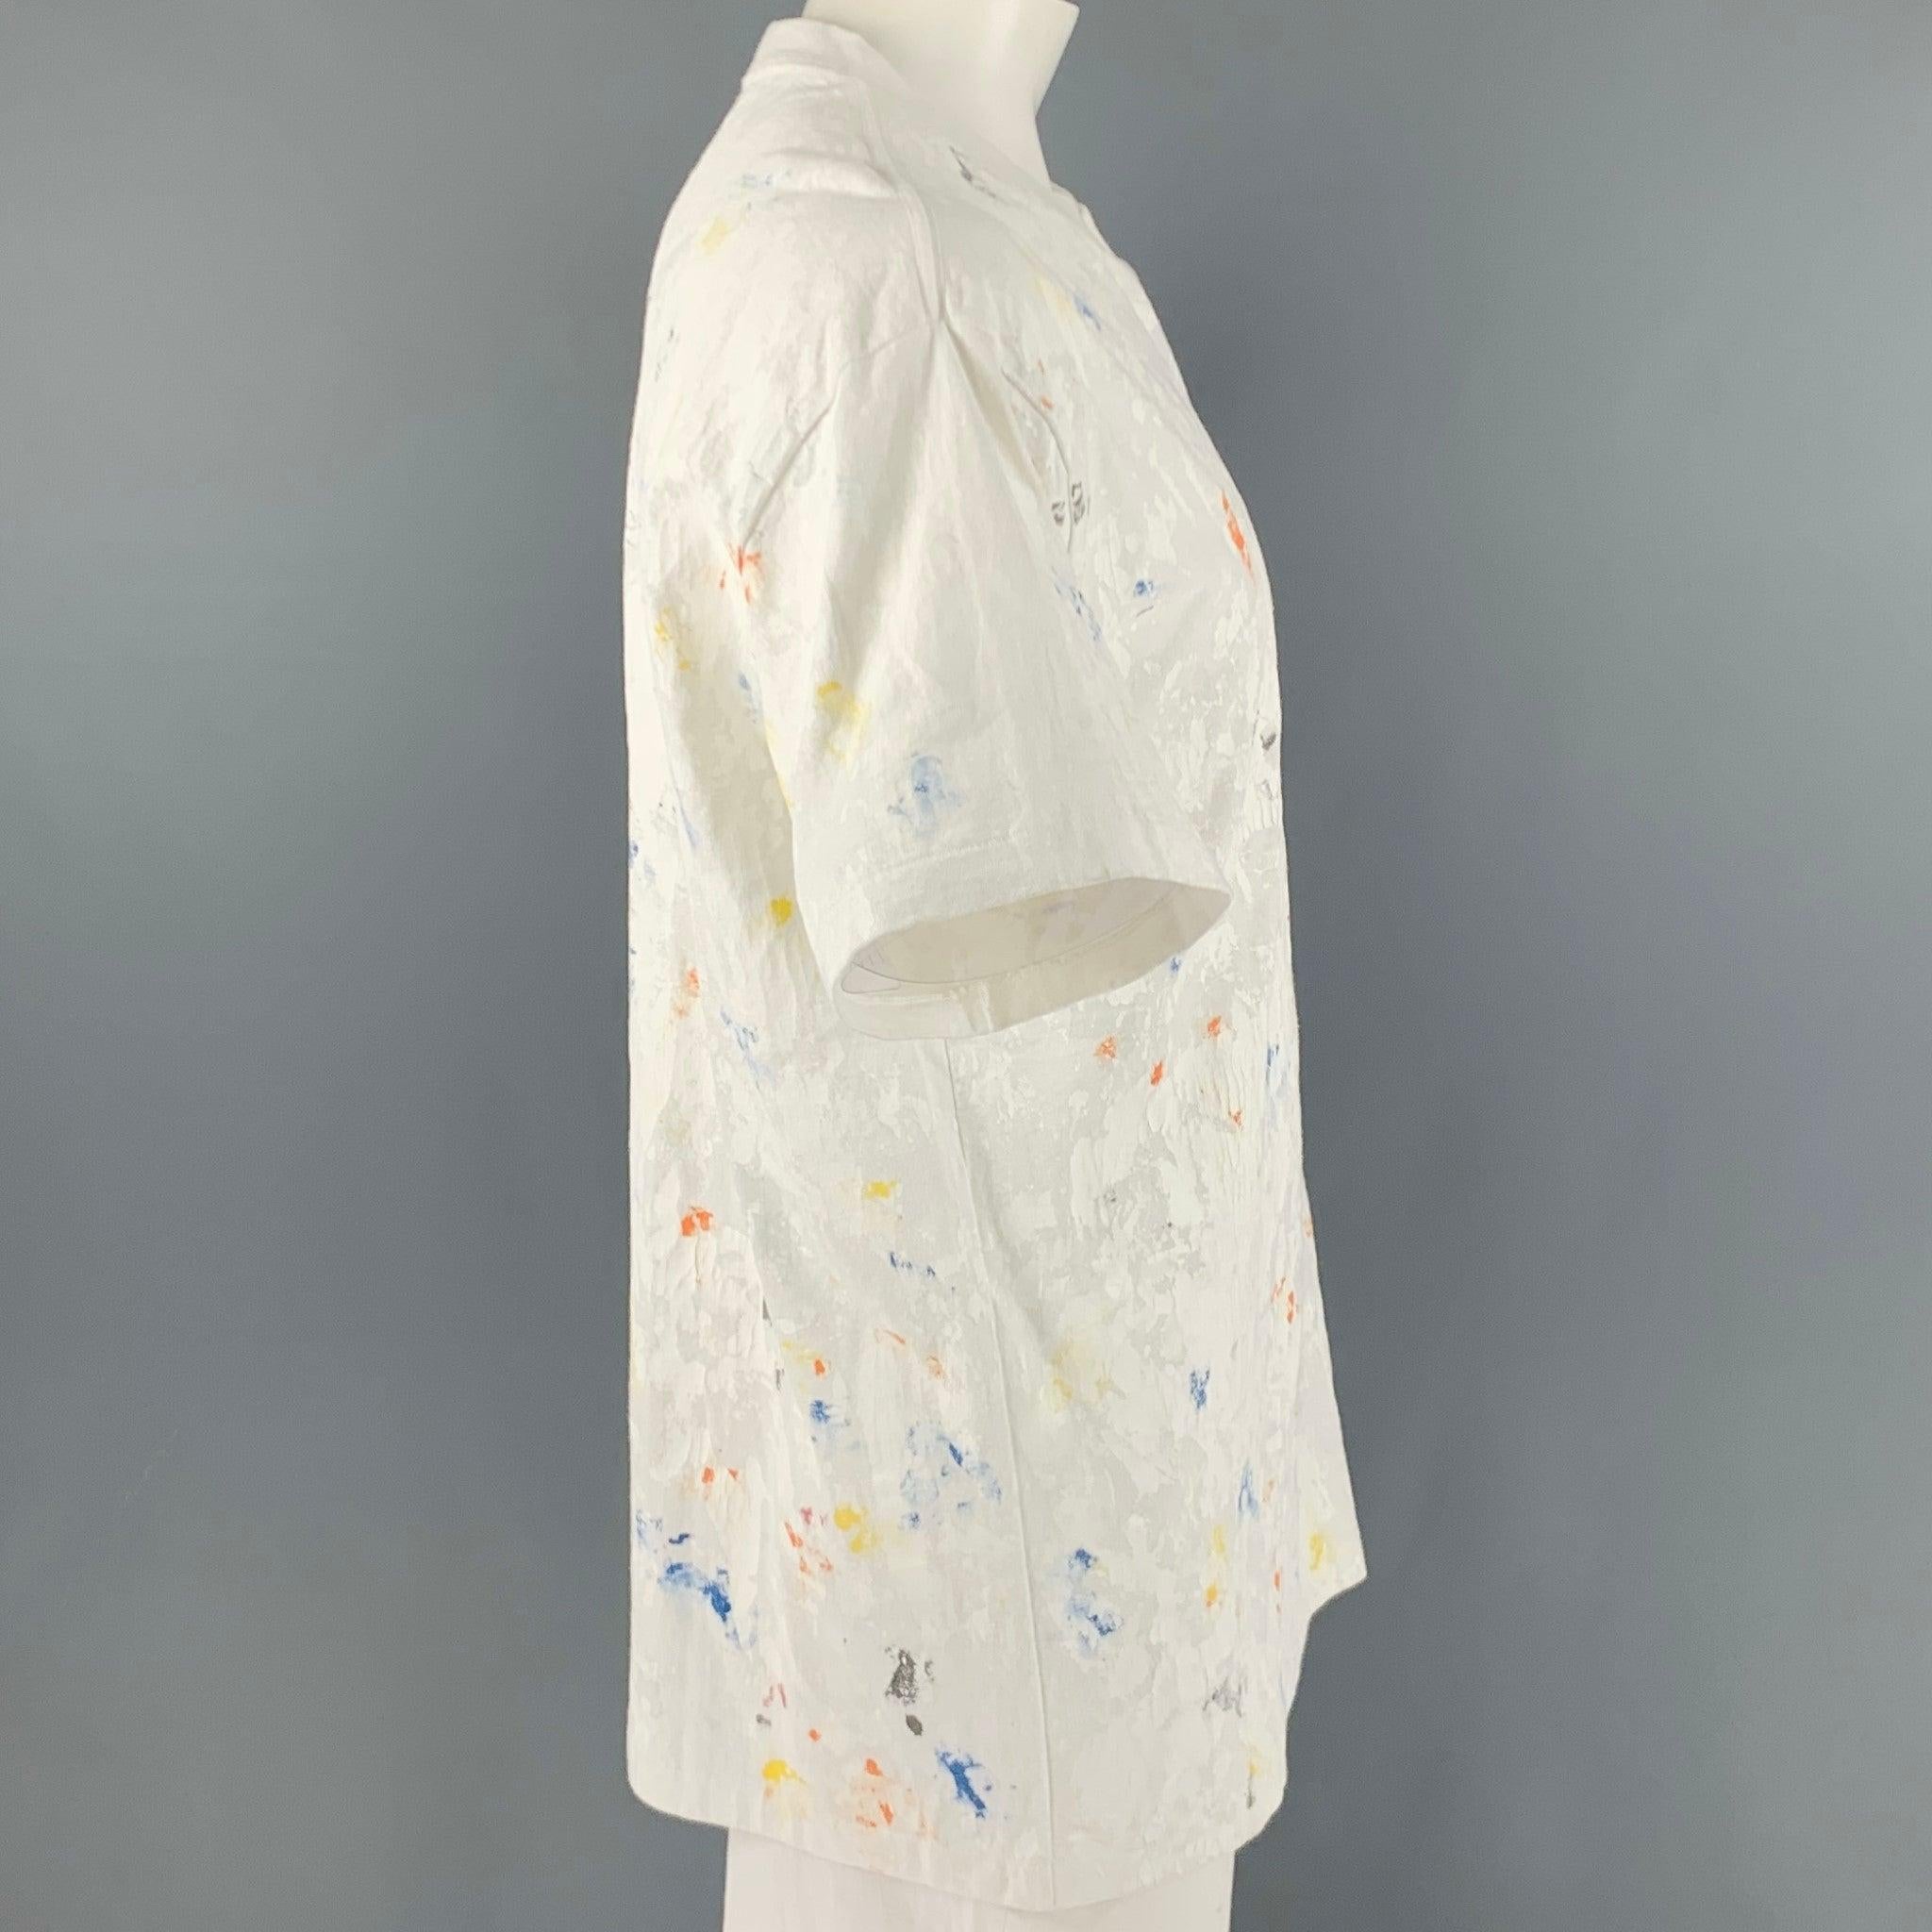 JOHN ELLIOT t-shirt
in a
white cotton fabric featuring a multi-color paint splatter style, and crew neck. Made in Japan.Excellent Pre-Owned Condition. 

Marked:   3 

Measurements: 
 
Shoulder: 22 inches Chest: 43 inches Sleeve: 8.5 inches Length: